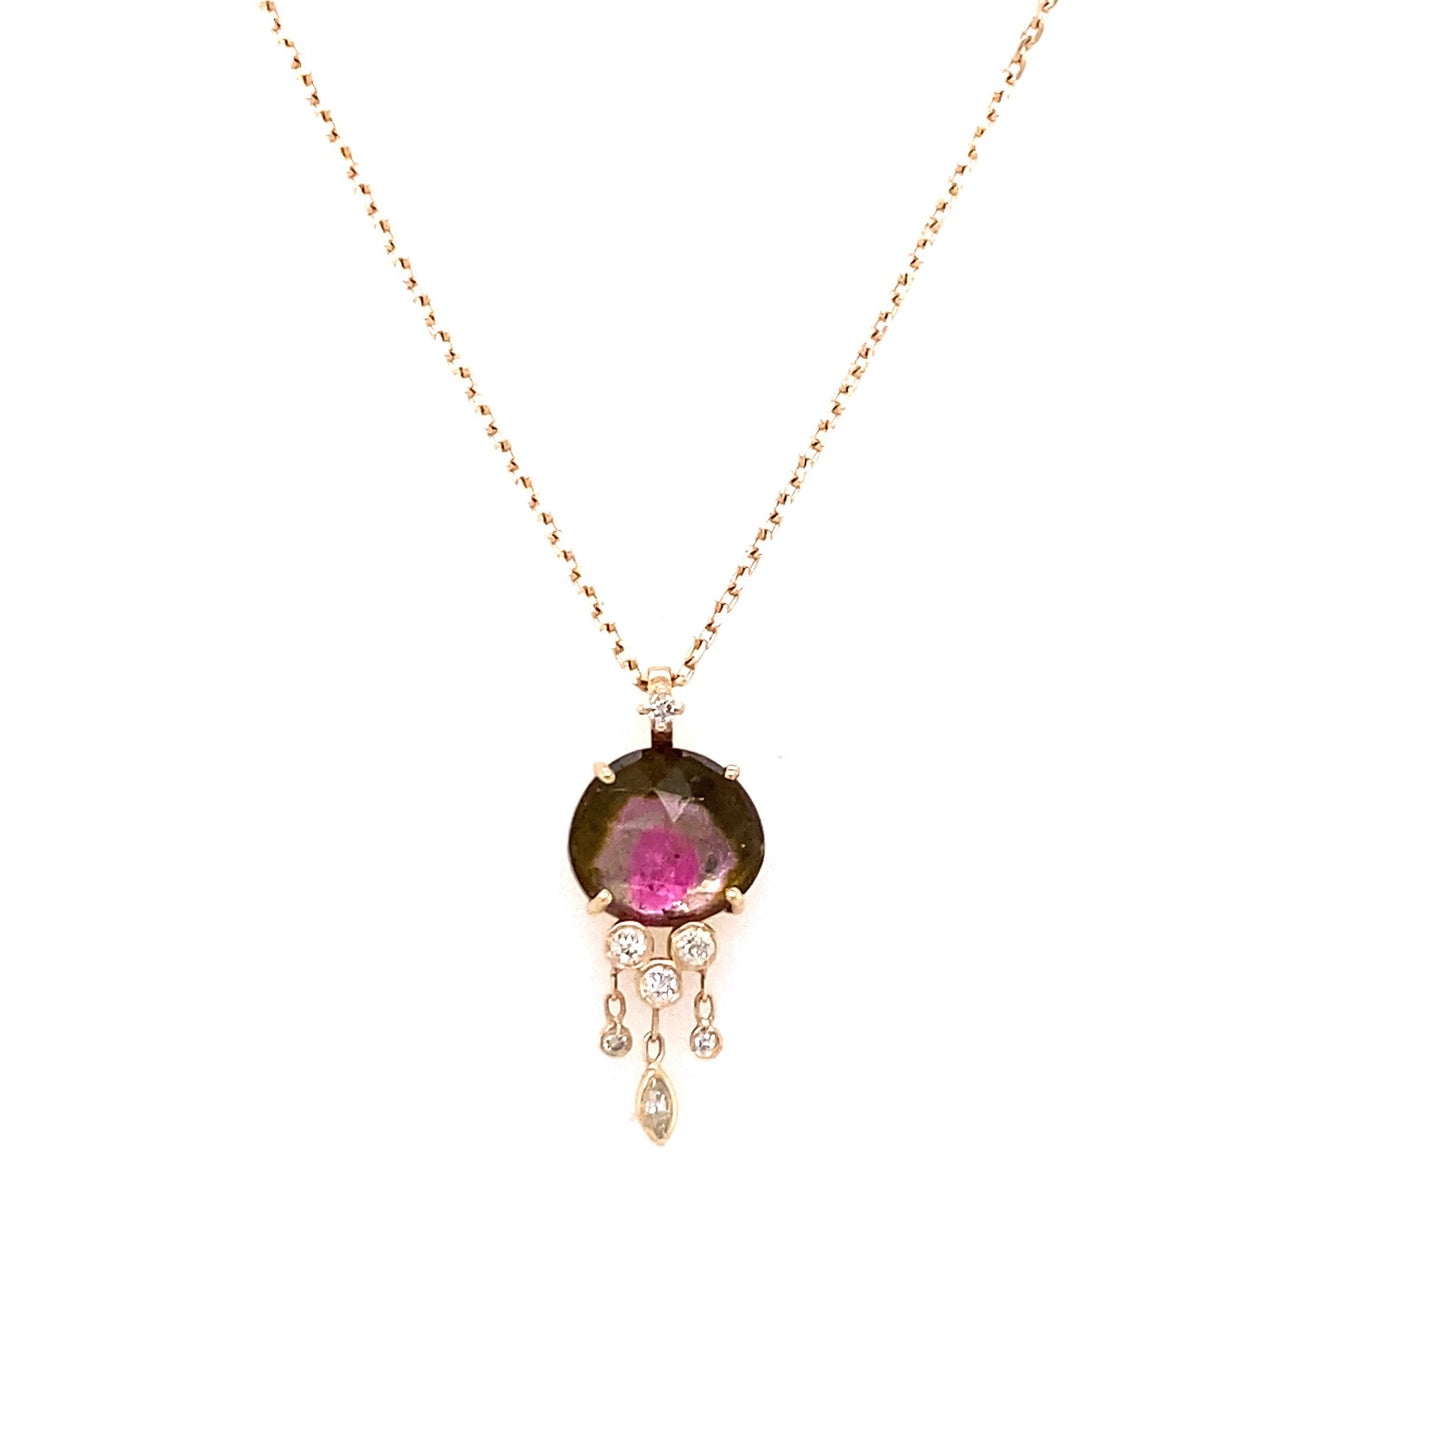 Celine Daoust 14kt Yellow Gold Jellyfish Tourmaline and Diamond Necklace